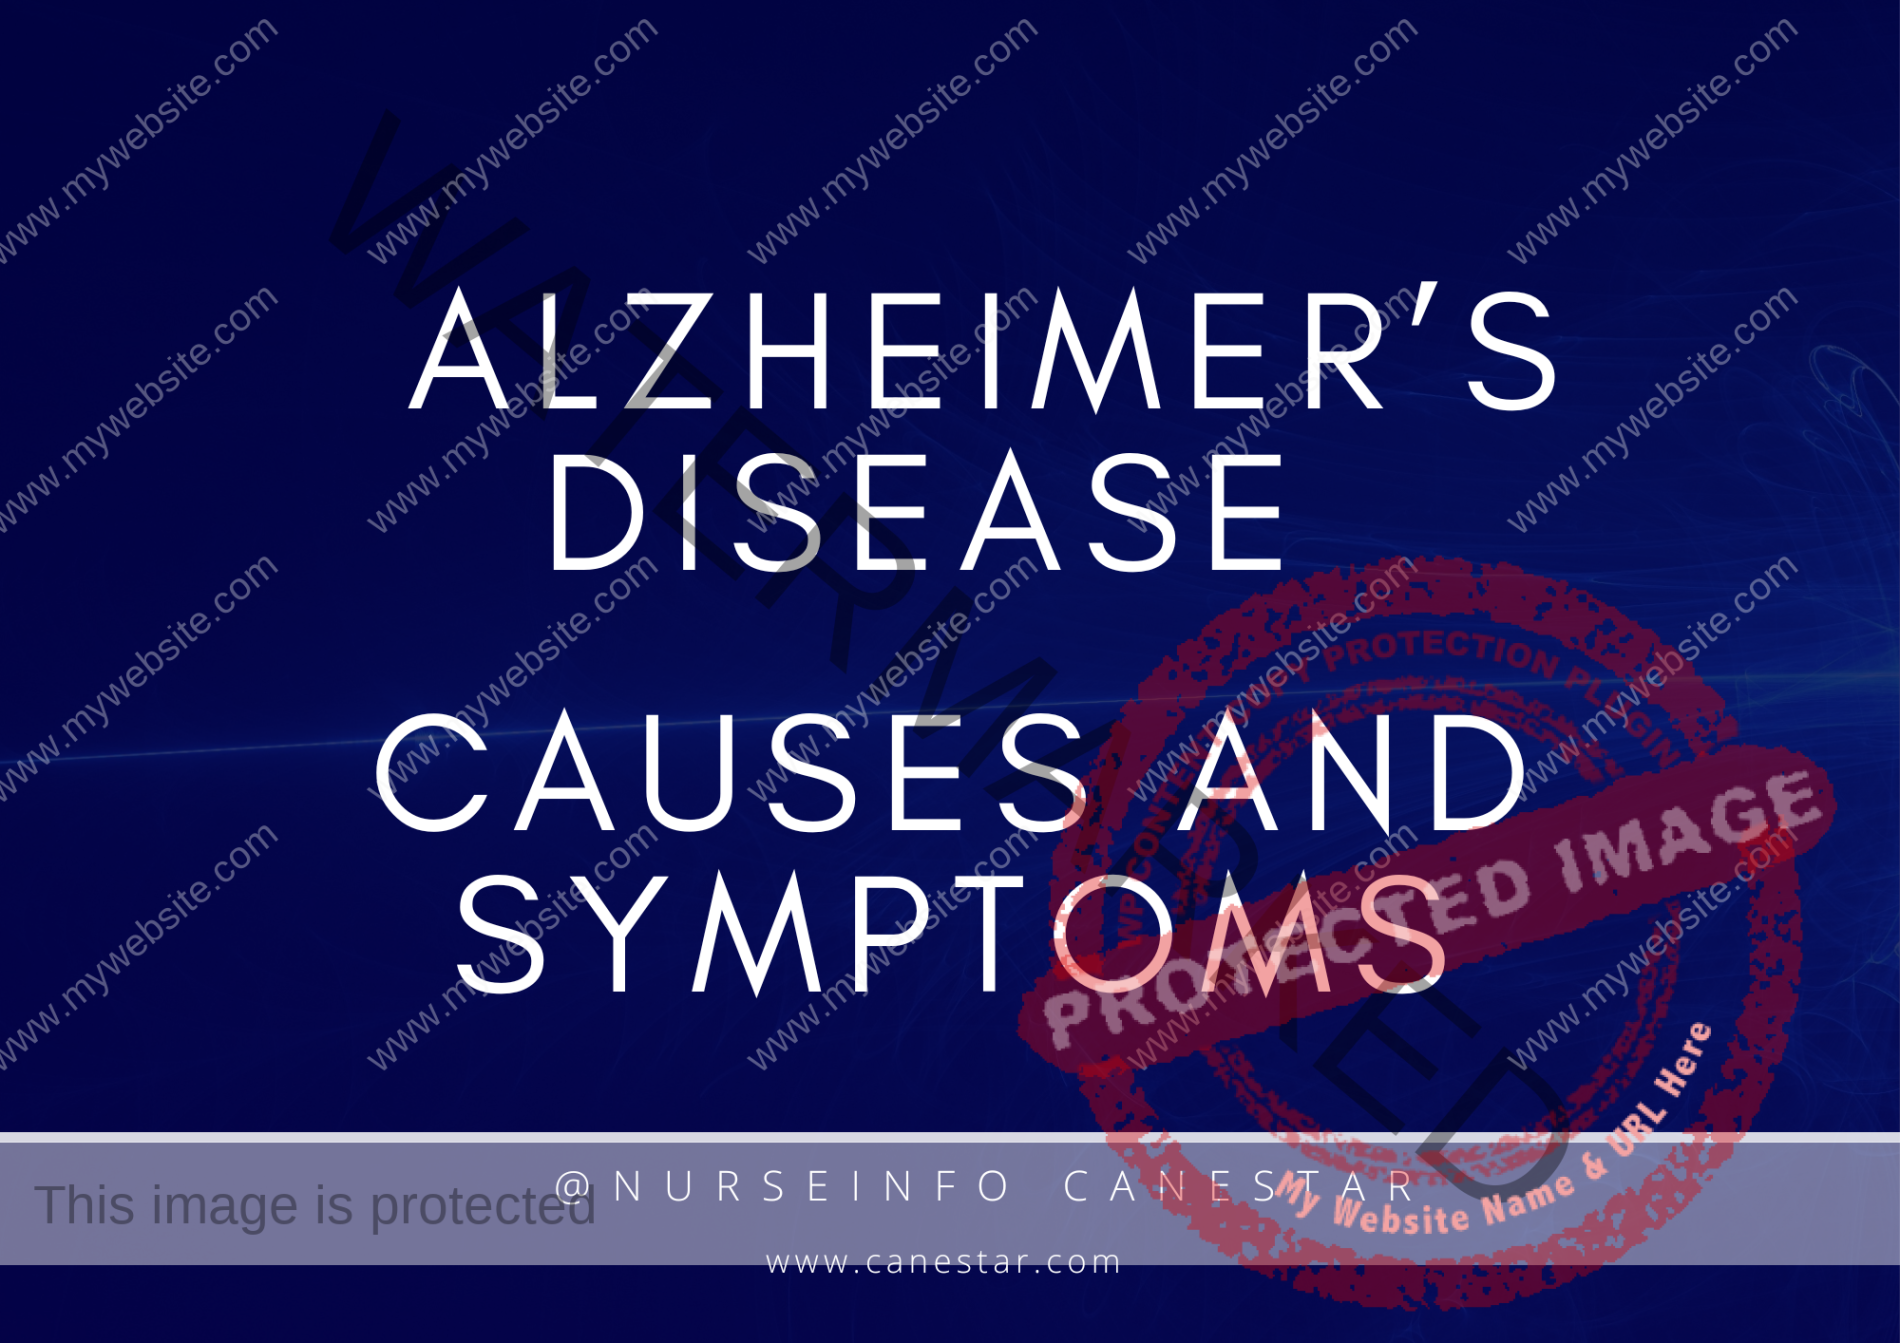 Alzheimer’s disease causes and symptoms